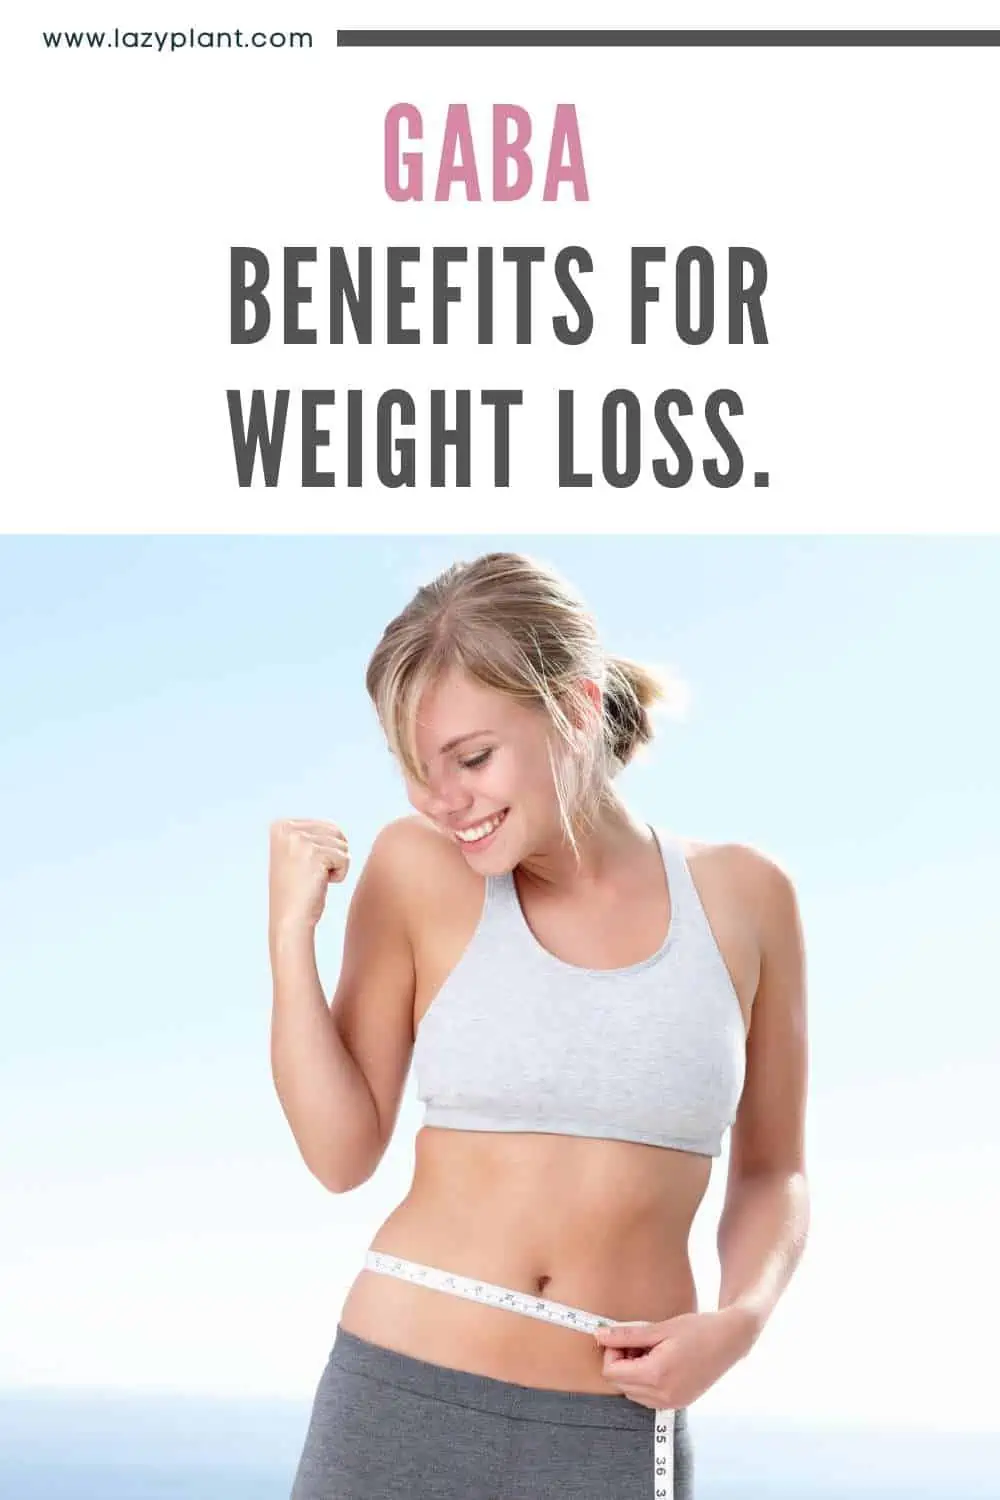 Getting high amounts of GABA from diet or supplements help lose weight.